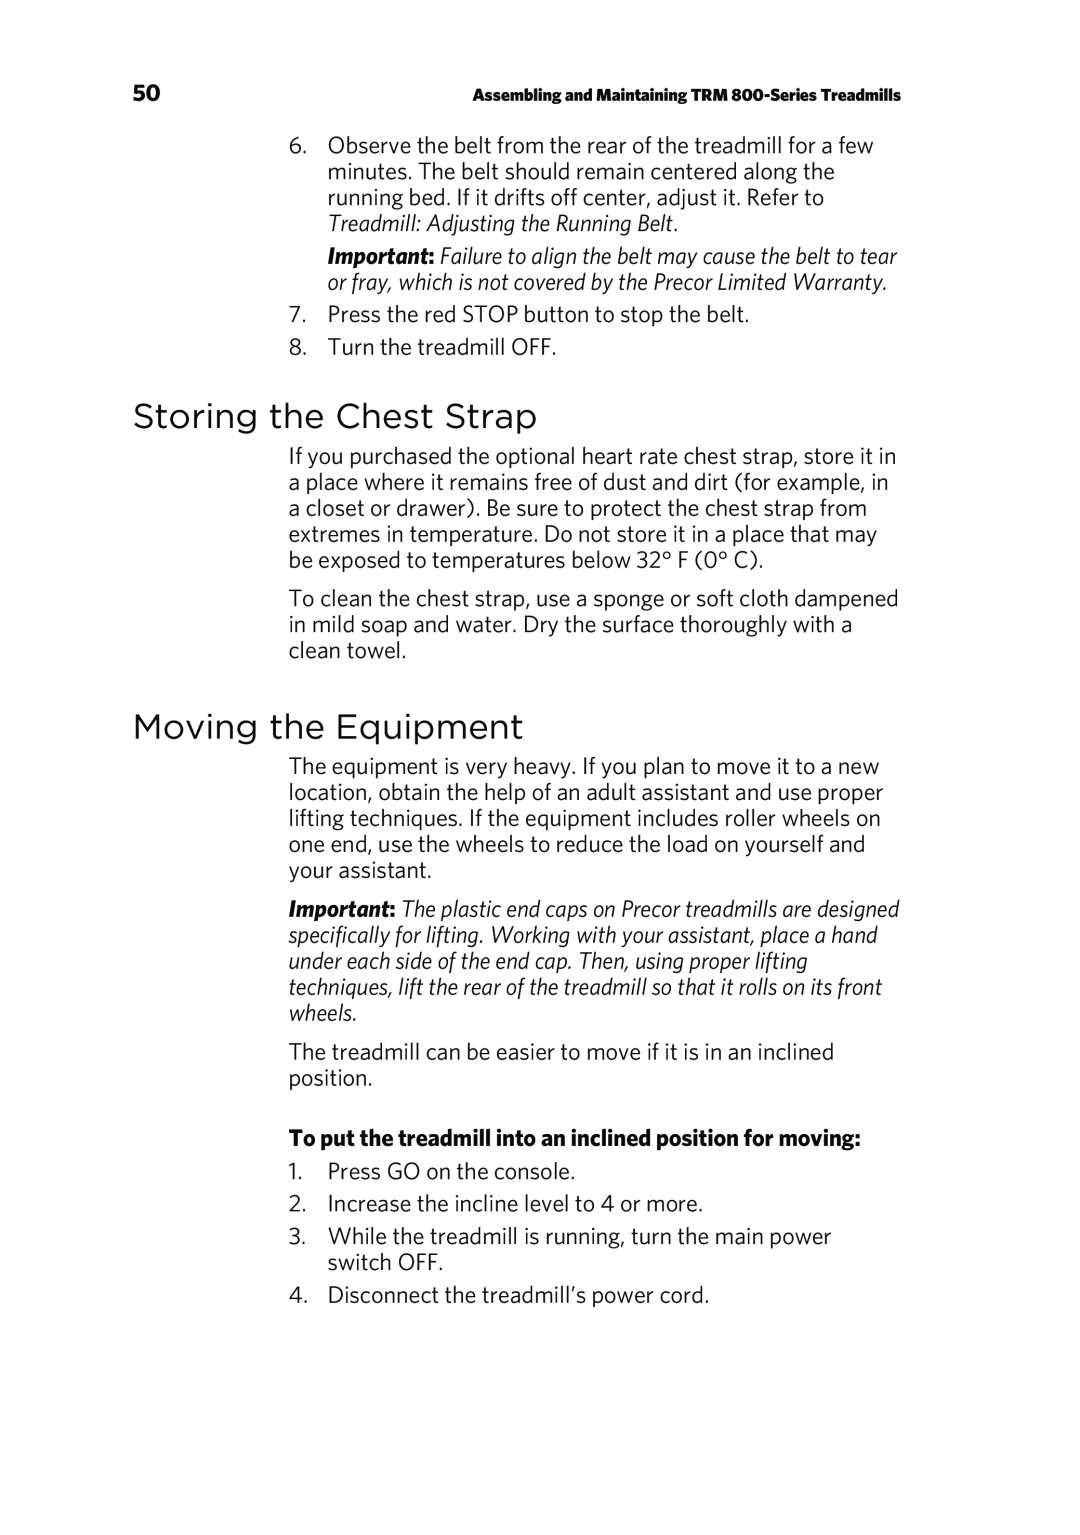 Precor P80 manual Storing the Chest Strap, Moving the Equipment 